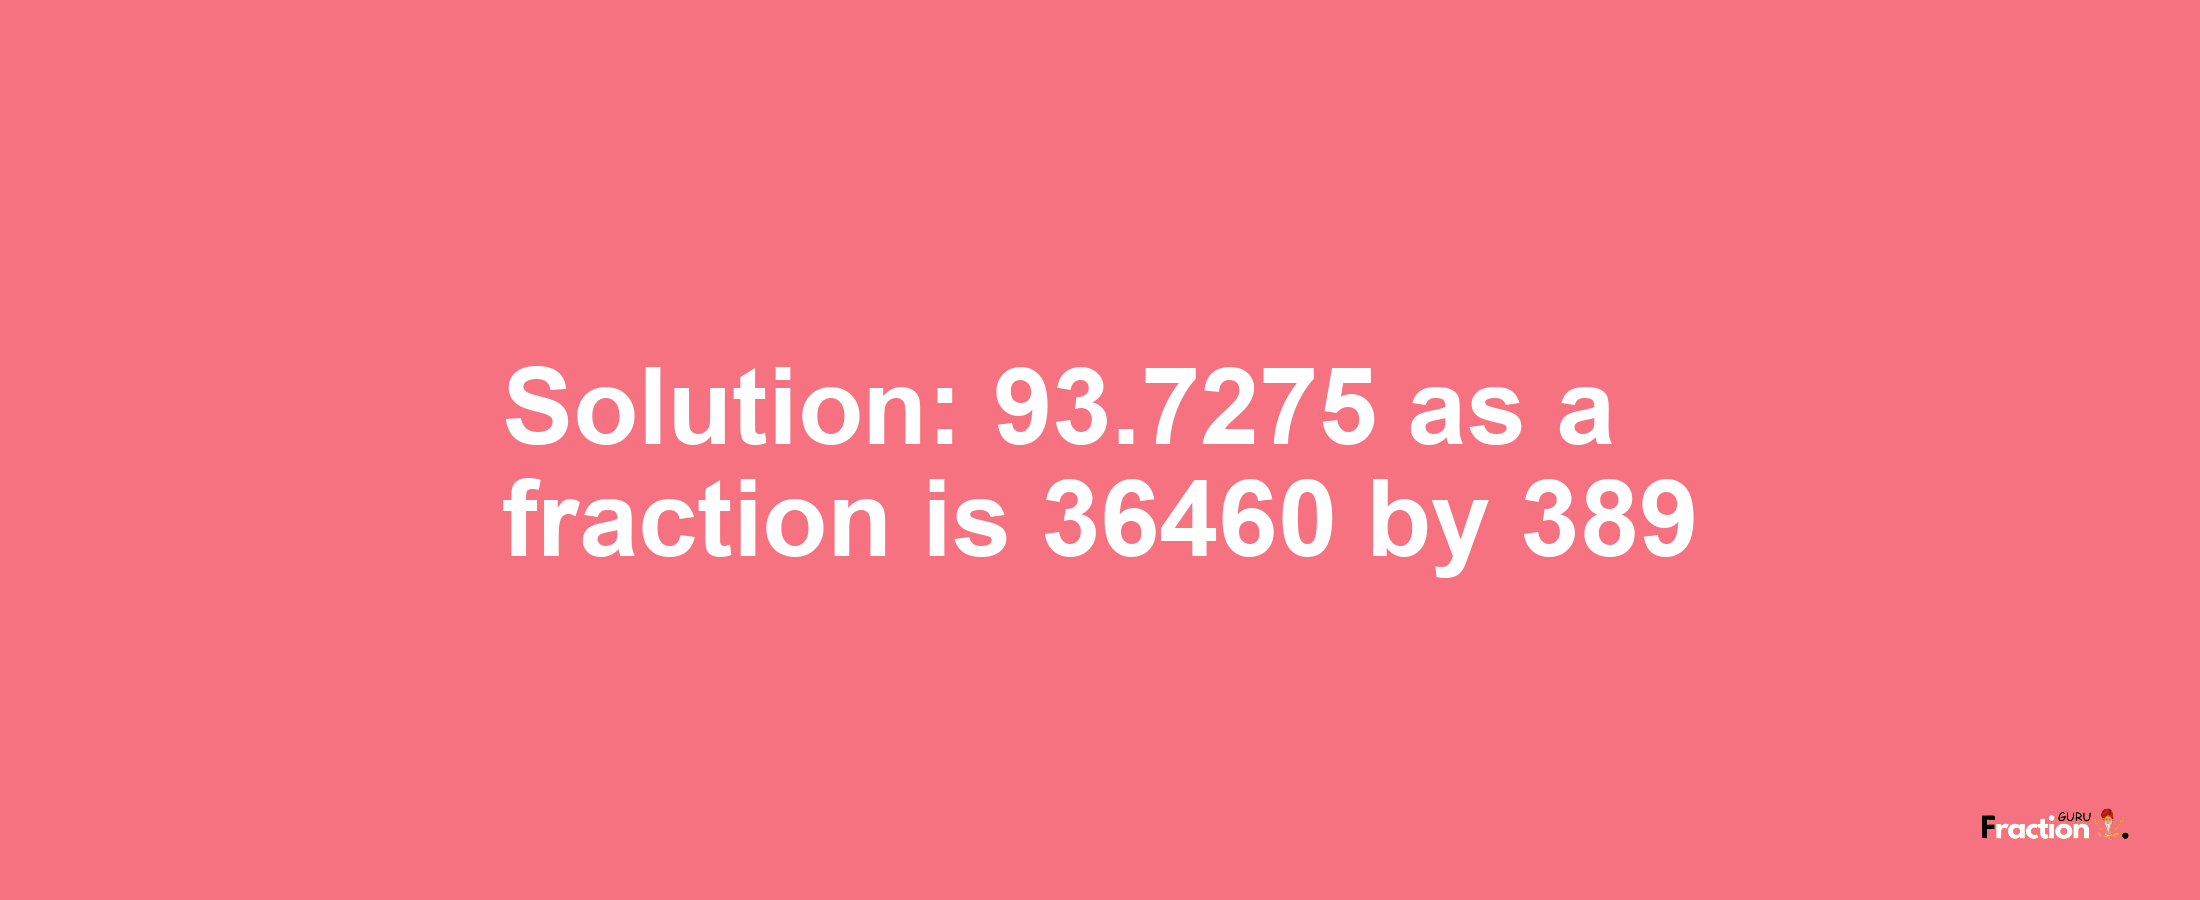 Solution:93.7275 as a fraction is 36460/389